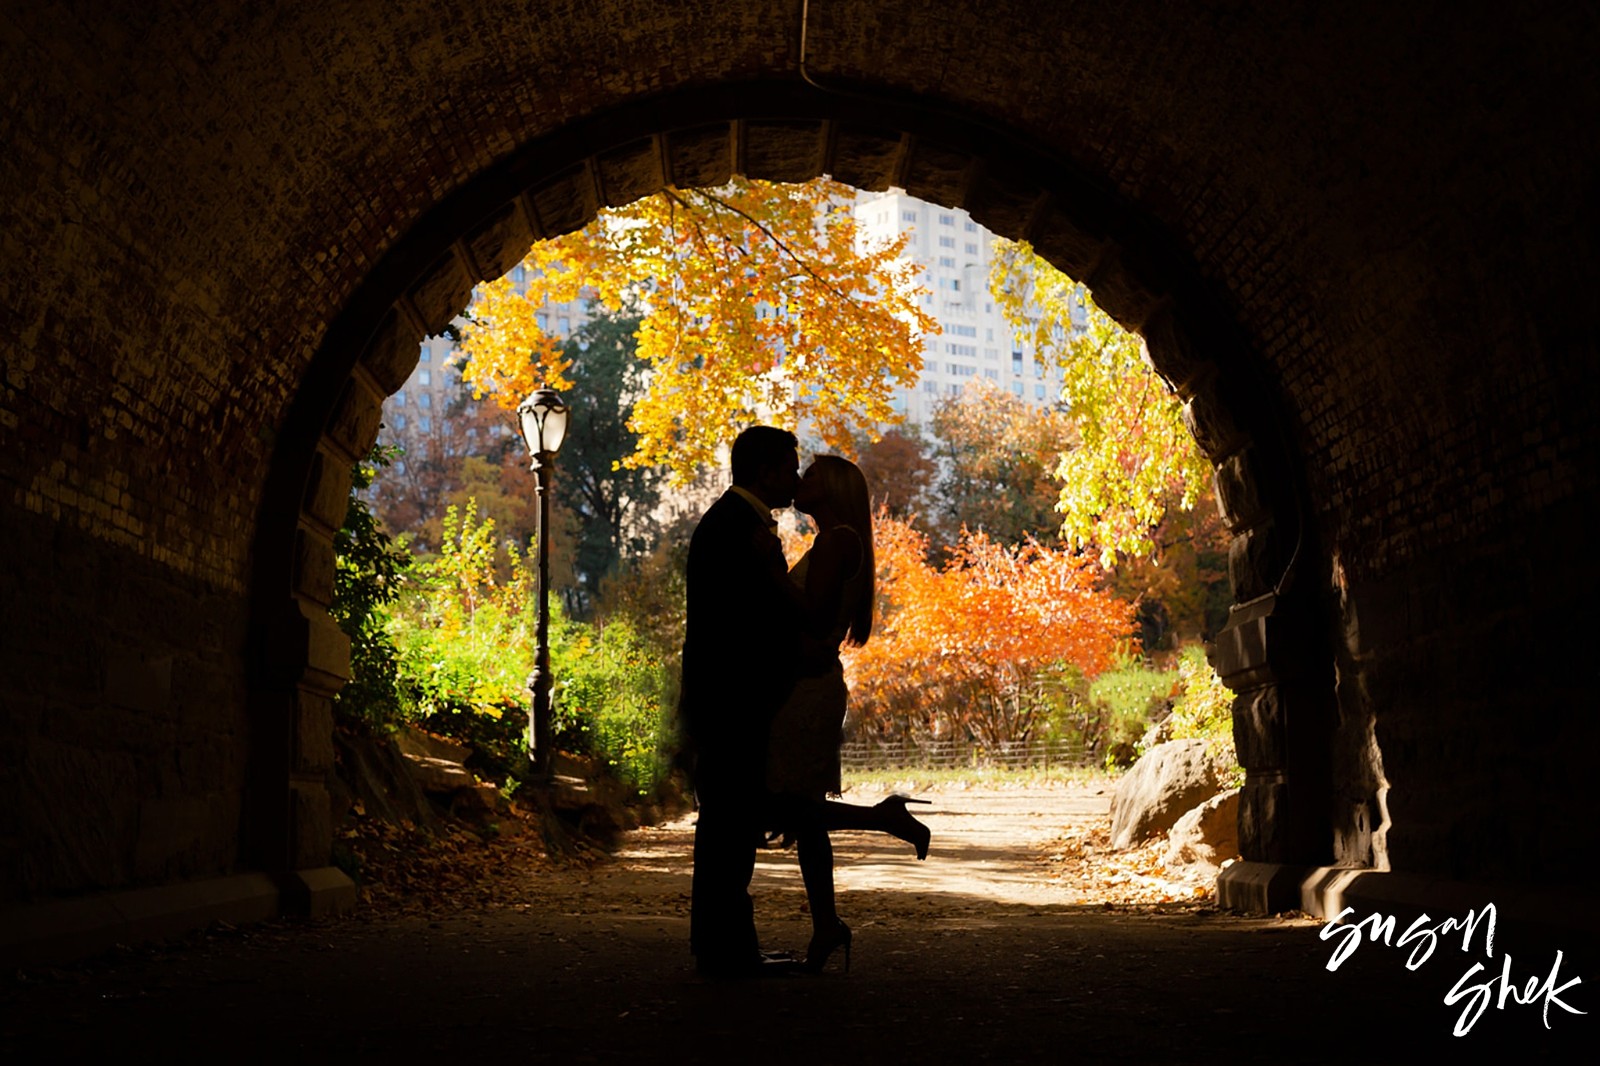 Inscope Arch Engagement Shoot, NYC Engagement Photographer, Engagement Session, Engagement Photography, Engagement Photographer, NYC Wedding Photographer